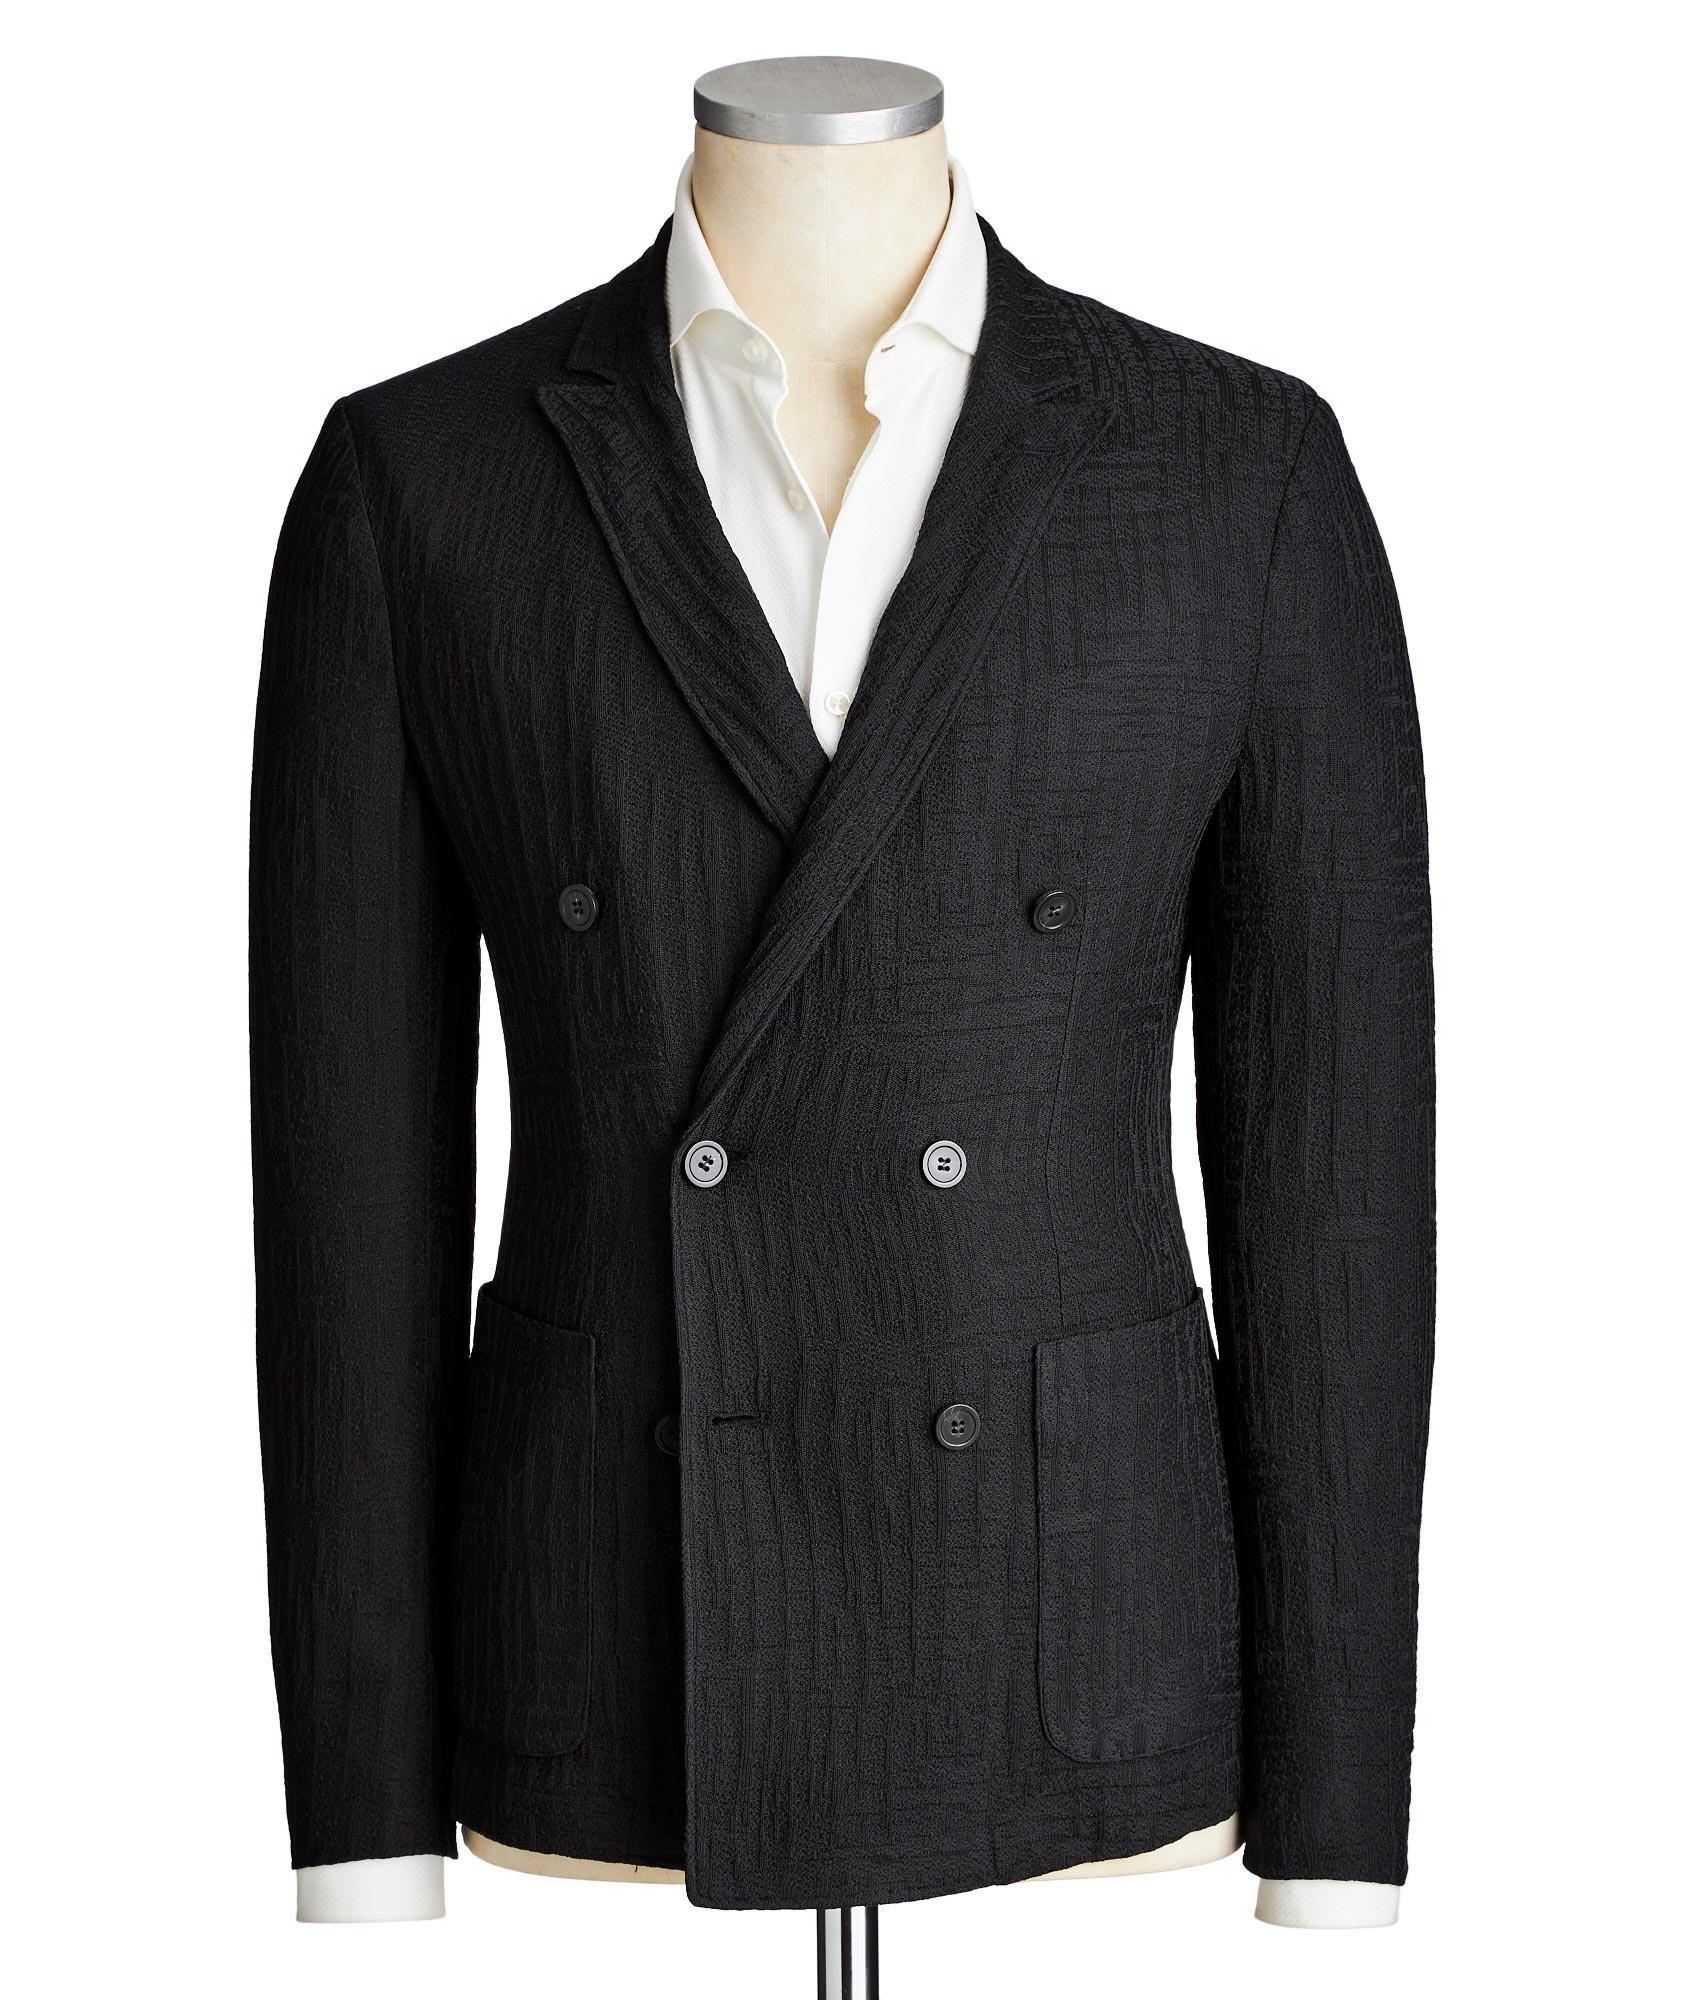 Unstructured Textured Sports Jacket image 0